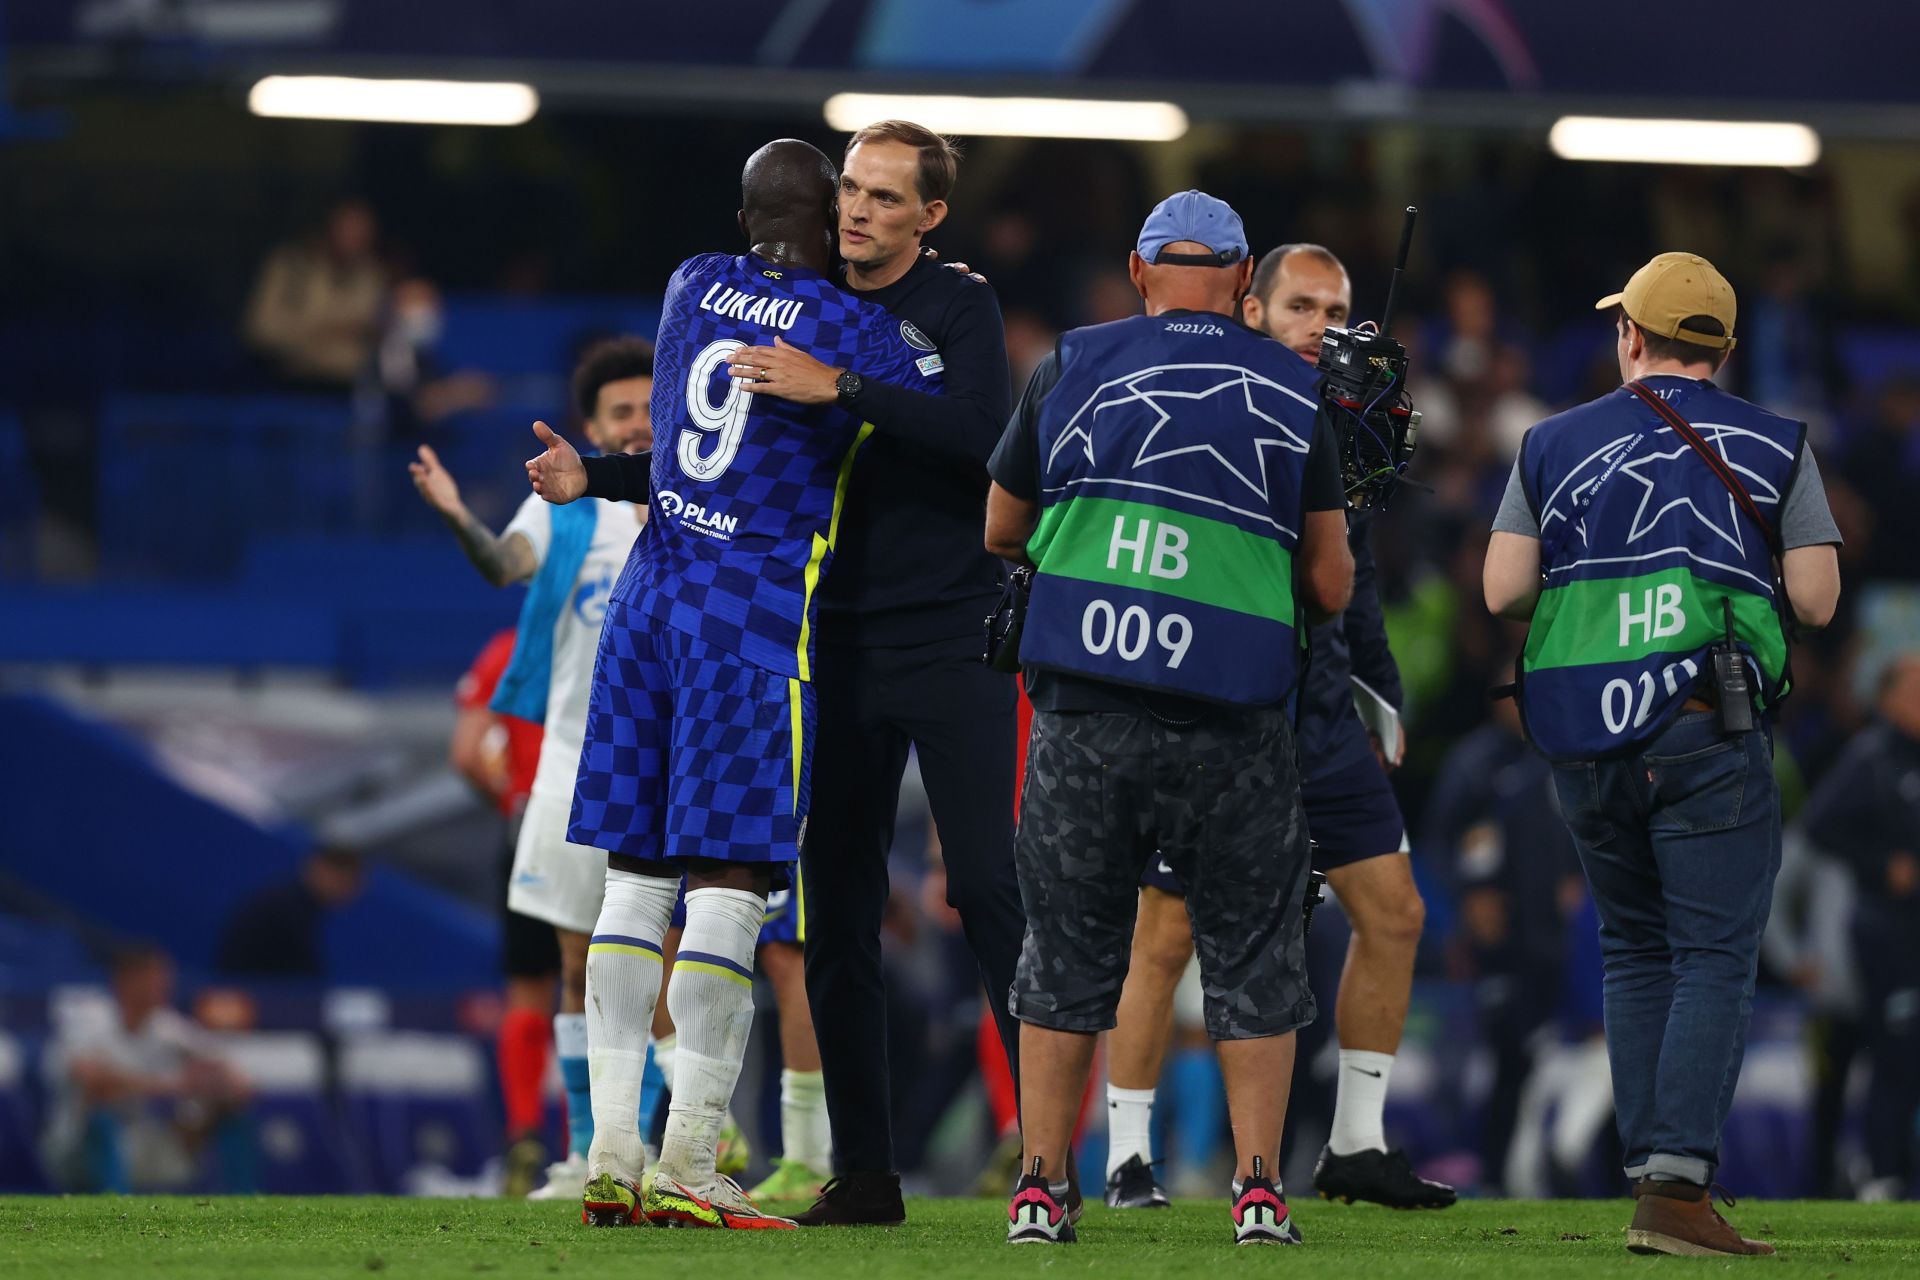 File photo of Chelsea manager Thomas Tuchel and Lukaku. (Photo by Clive Rose/Getty Images)